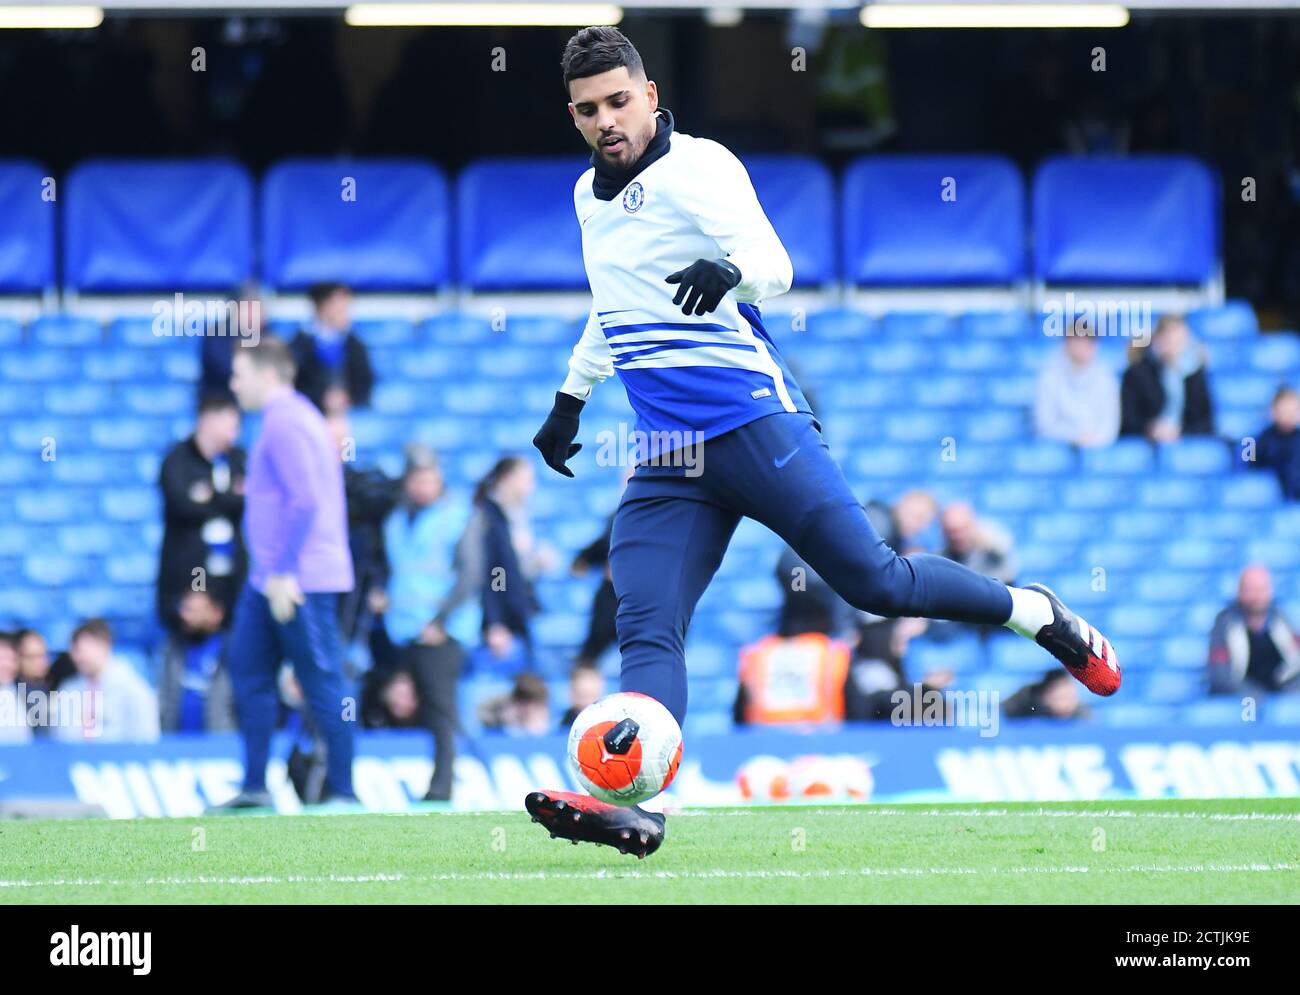 LONDON, ENGLAND - FEBRUARY 22, 2020: Emerson Palmieri dos Santos of Chelsea pictured during the 2019/20 Premier League game between Chelsea FC and Tottenham Hotspur FC at Stamford Bridge. Stock Photo